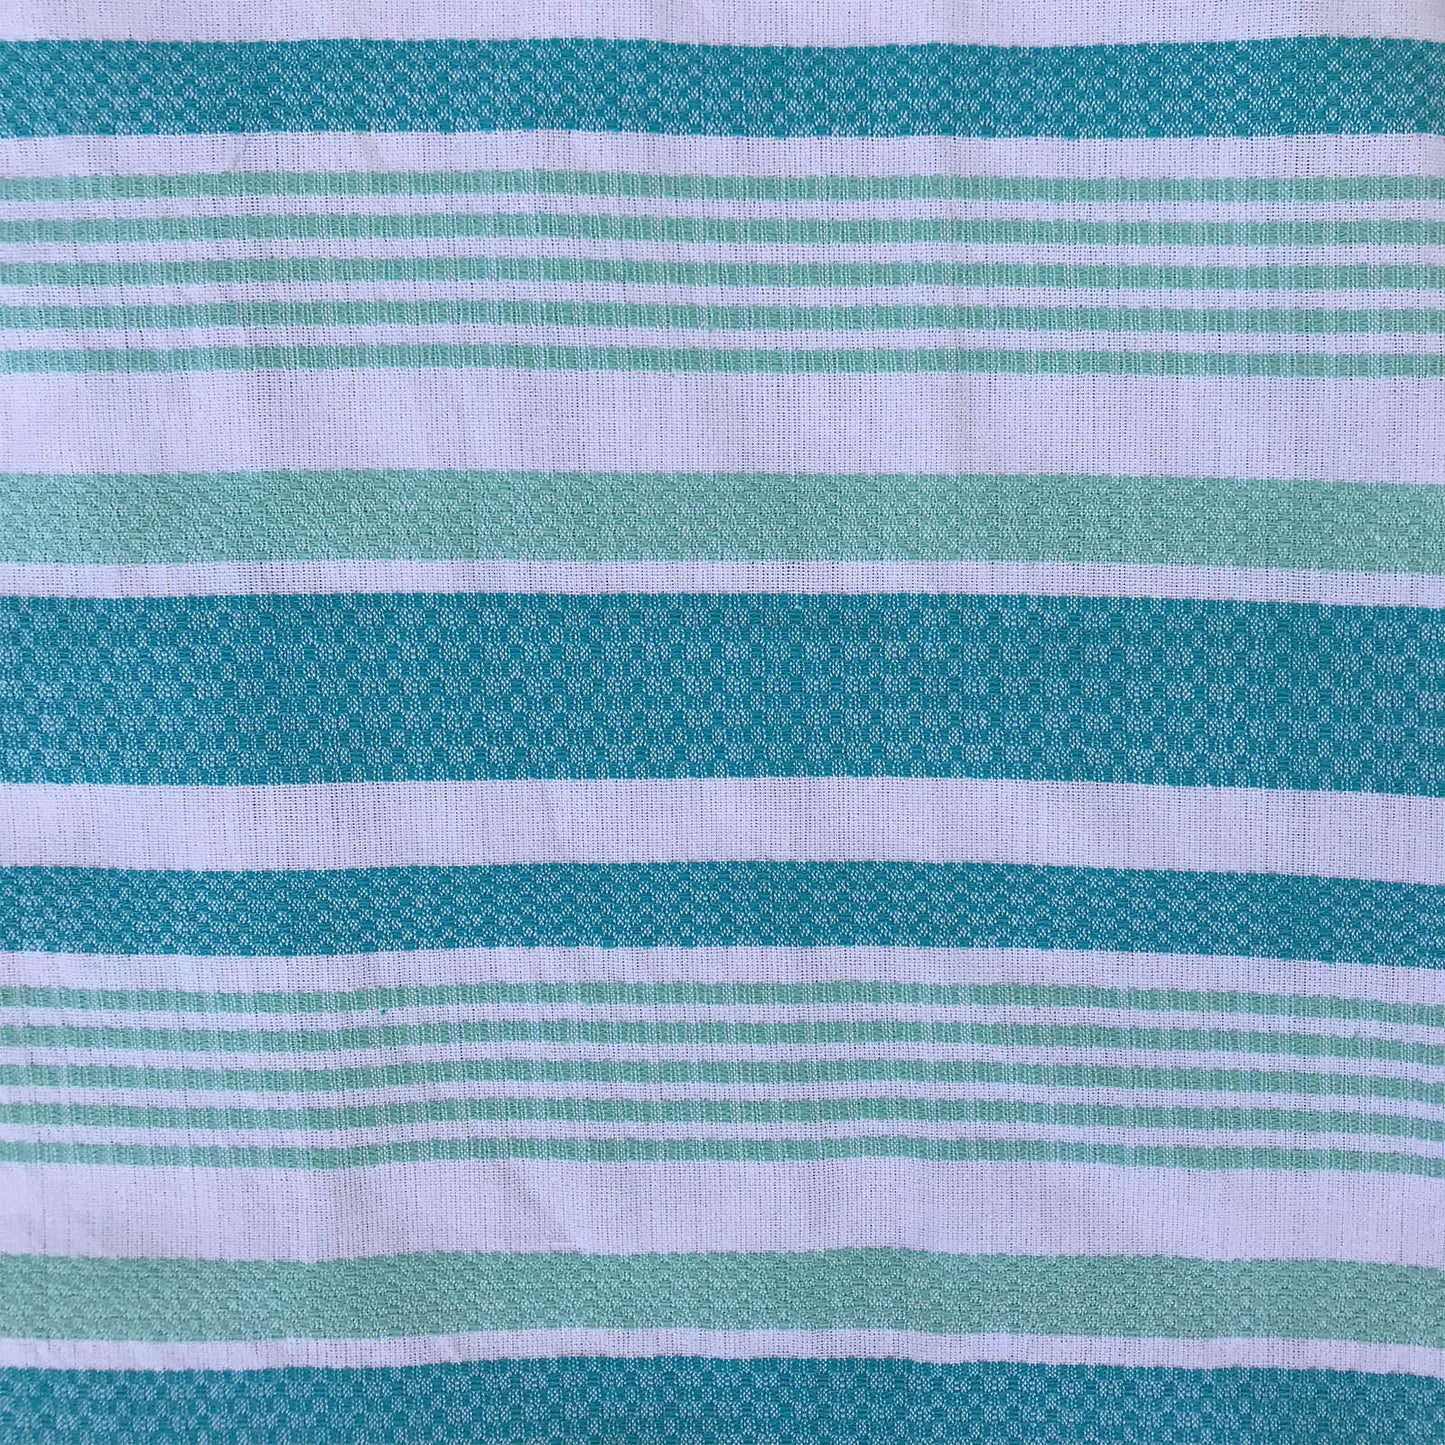 Freostyle Turkish Towels with Pockets, Turquoise Coast print, close up of weave